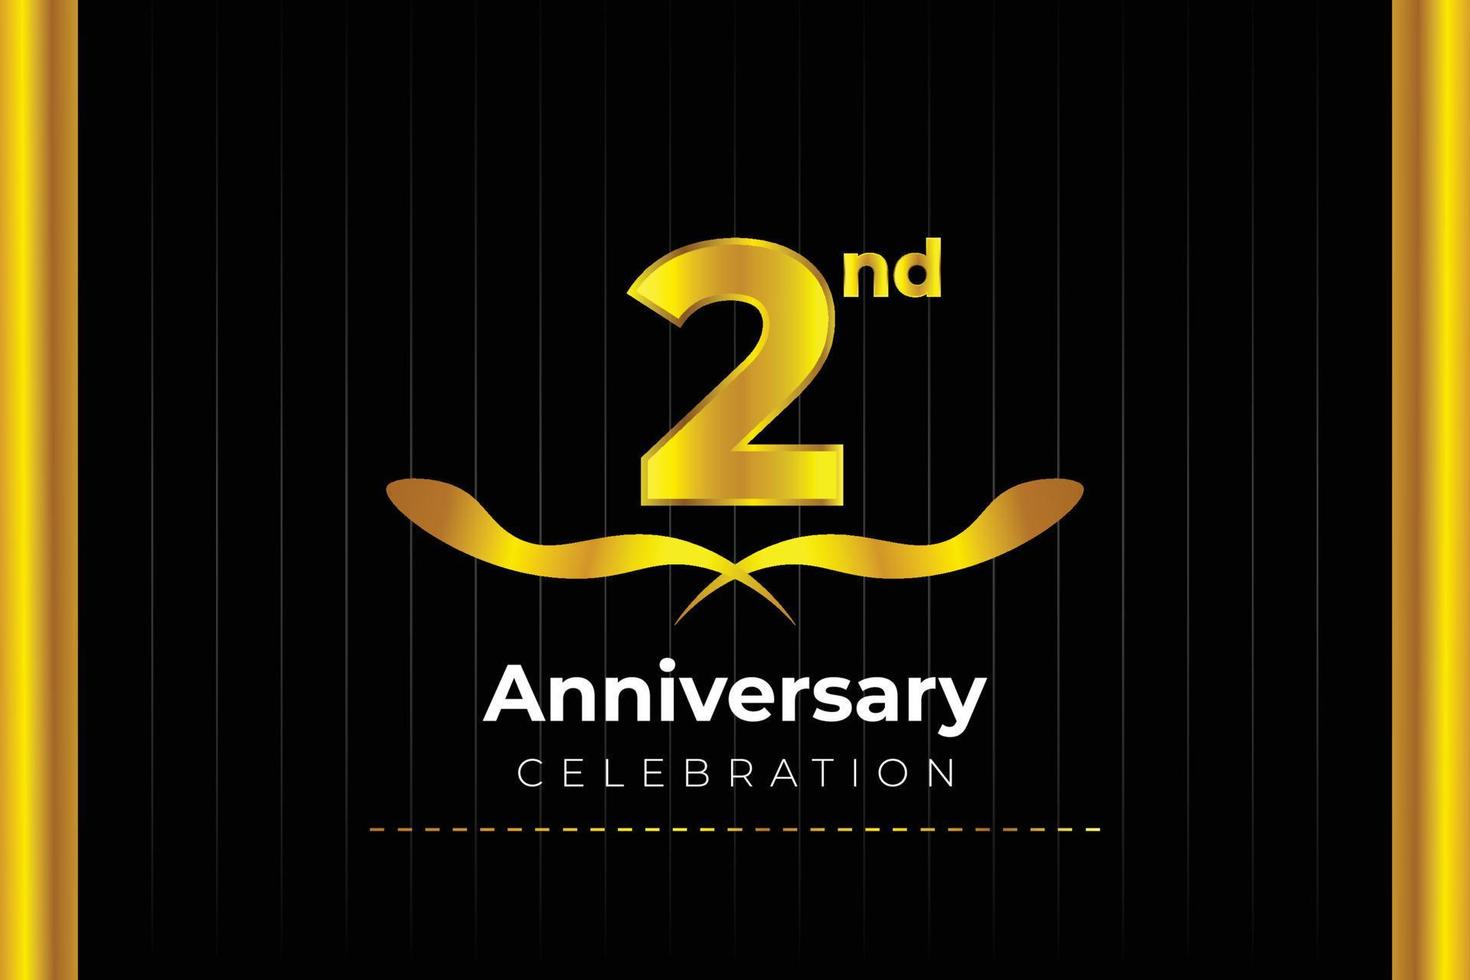 2nd Anniversary Celebration design with creative background concept. vector